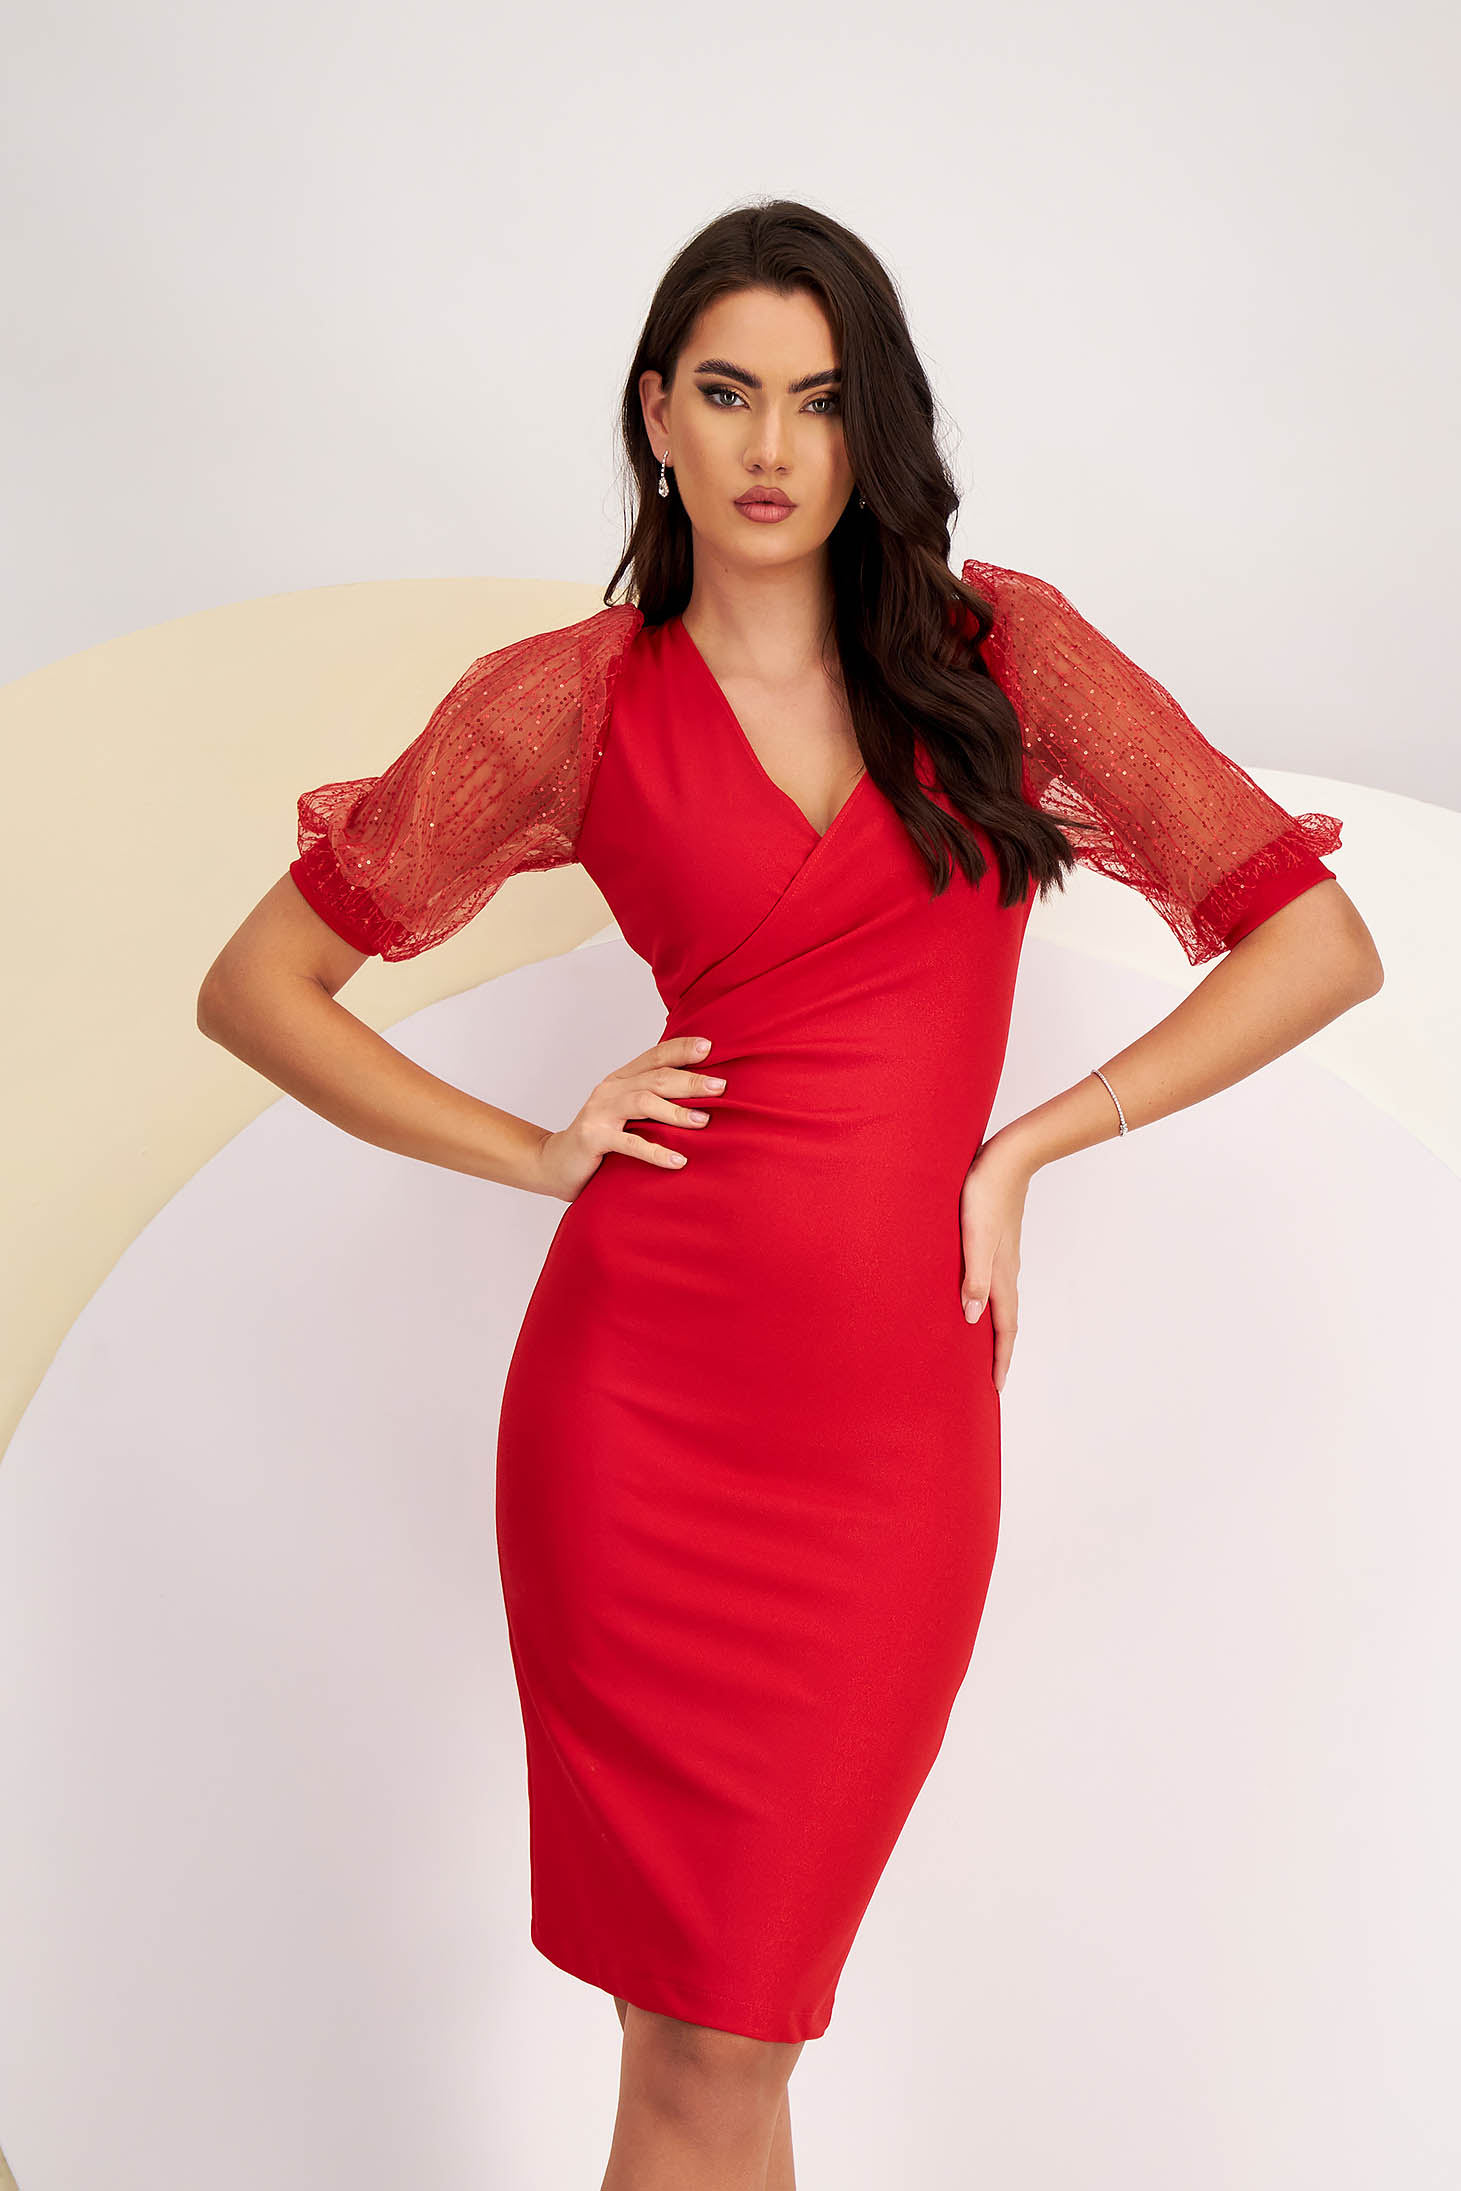 Red Crepe Pencil Dress with Lace Sleeves and Crossover Neckline - StarShinerS